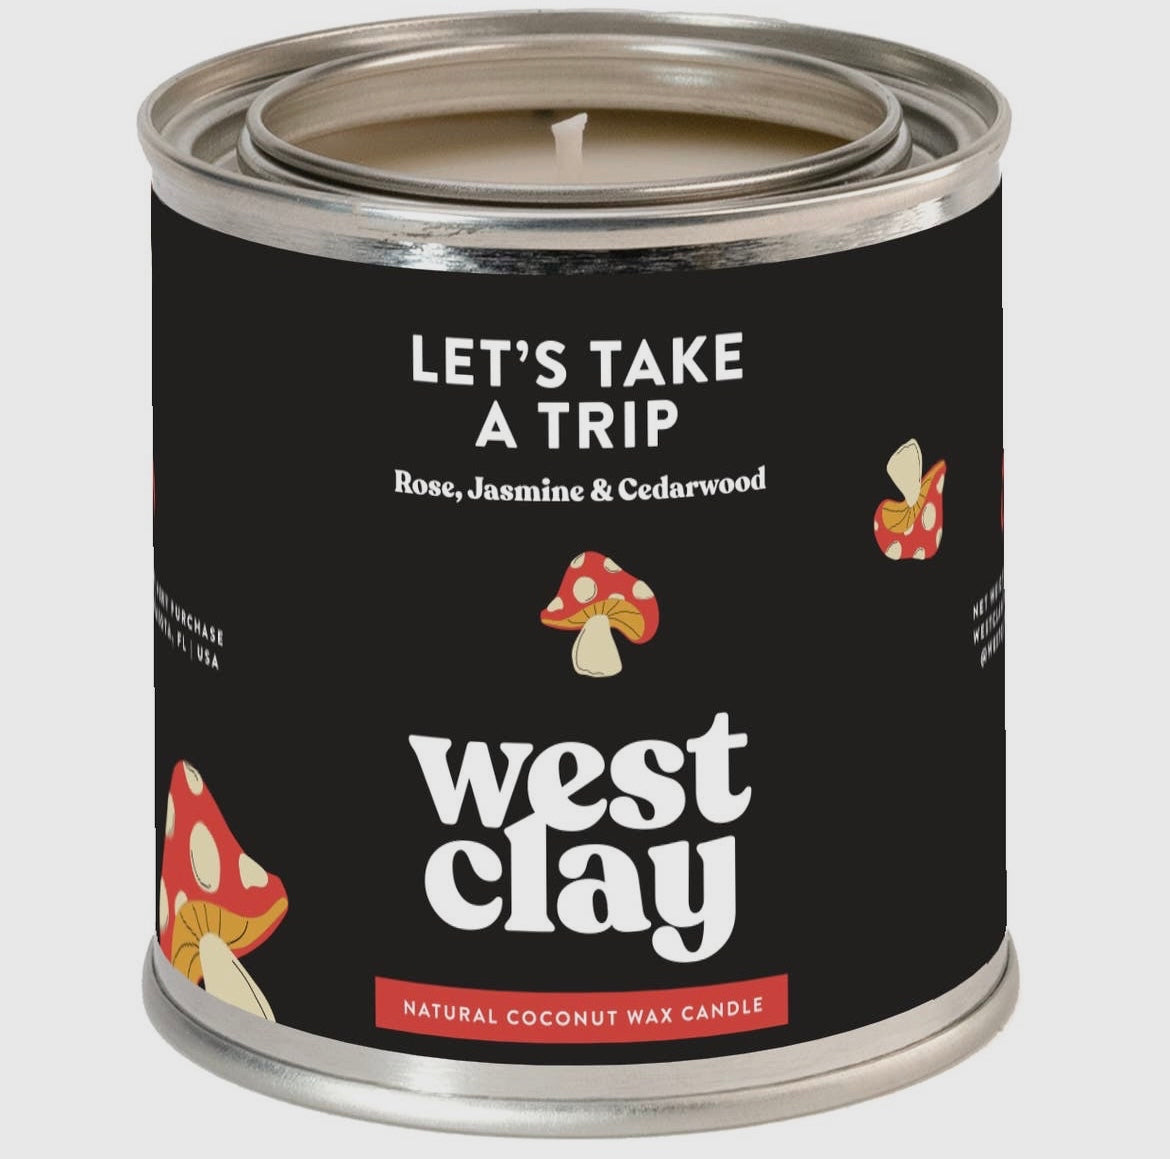 Take a Trip Paint-can Candle